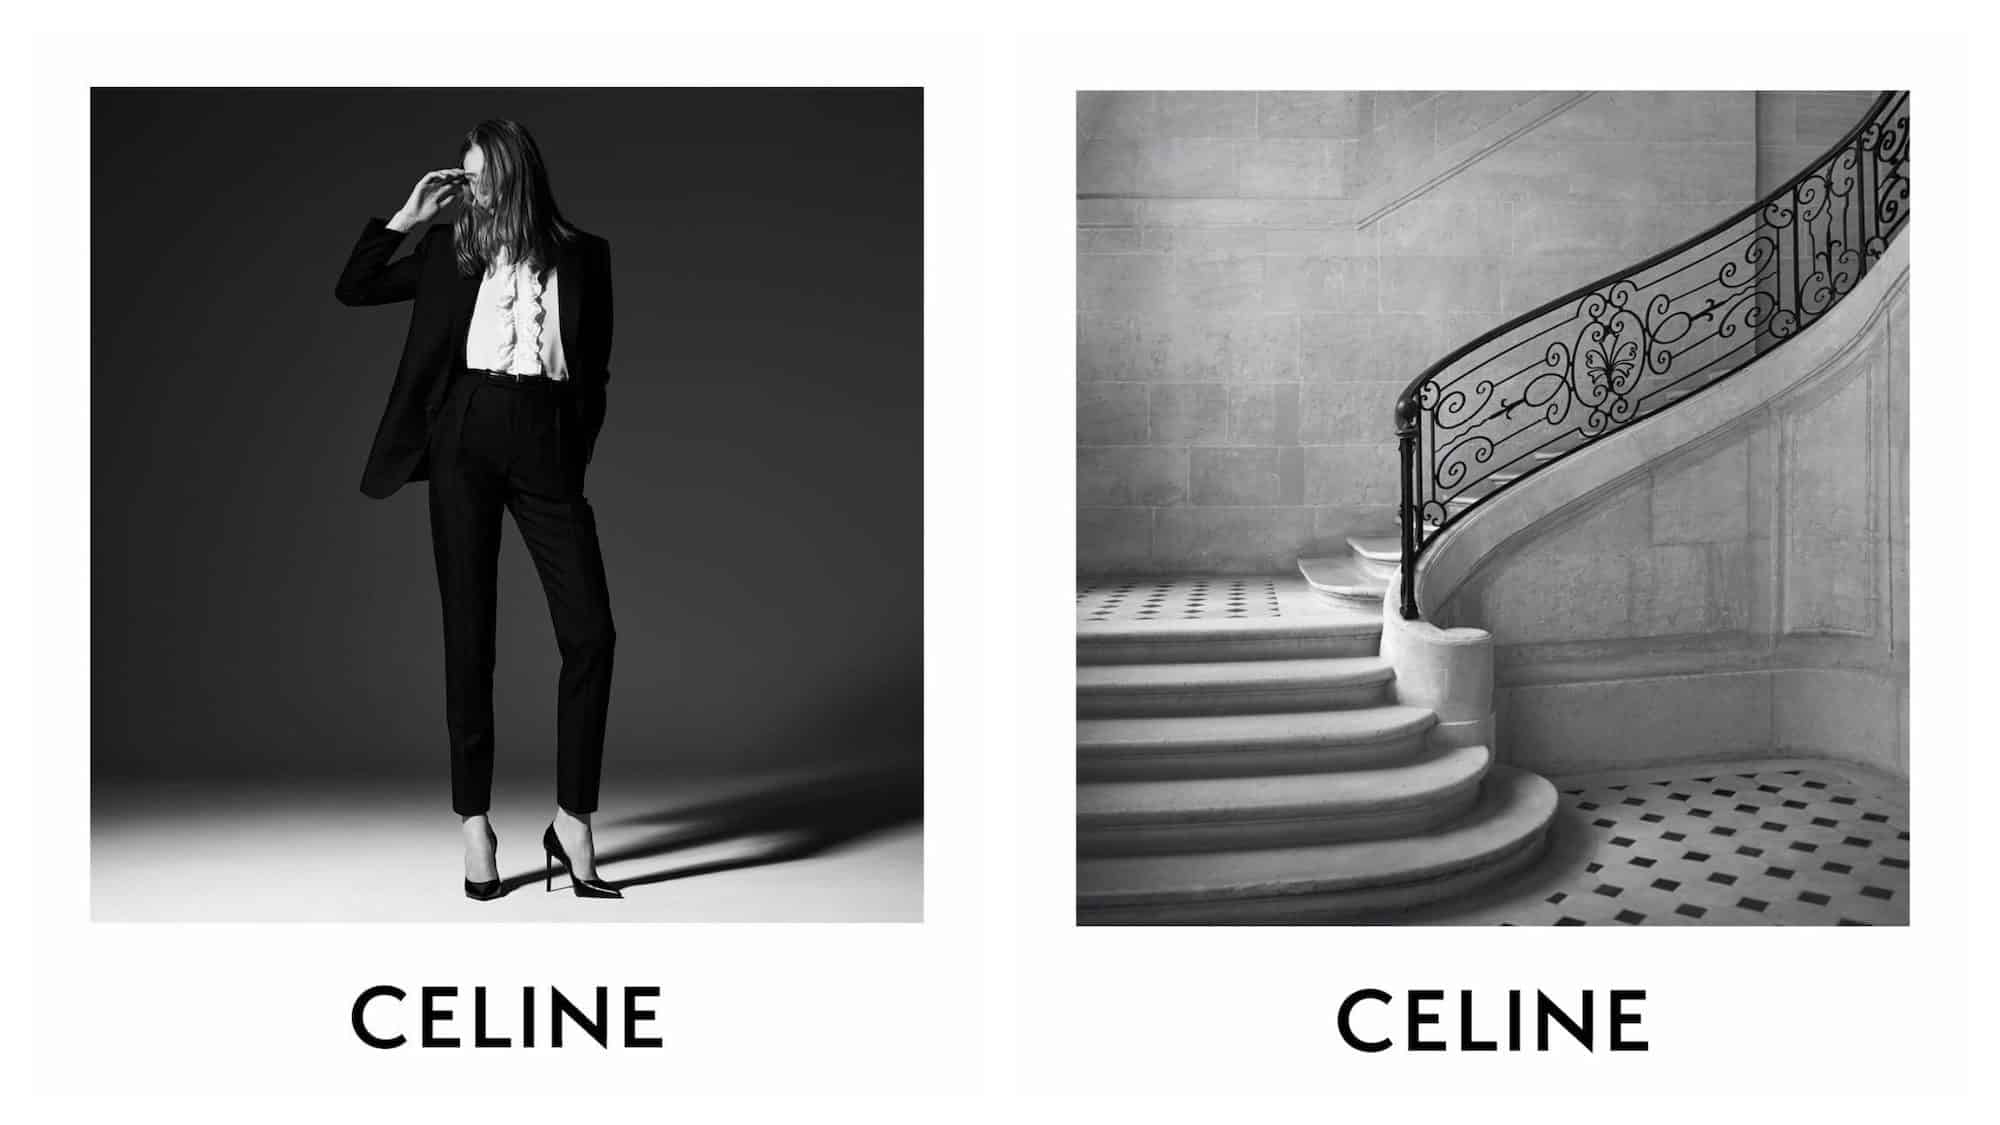 Celine is the name to know when shopping in Paris for its sleek suits (left) but also the interiors of the flagship store alone, like this period stone staircase (right).